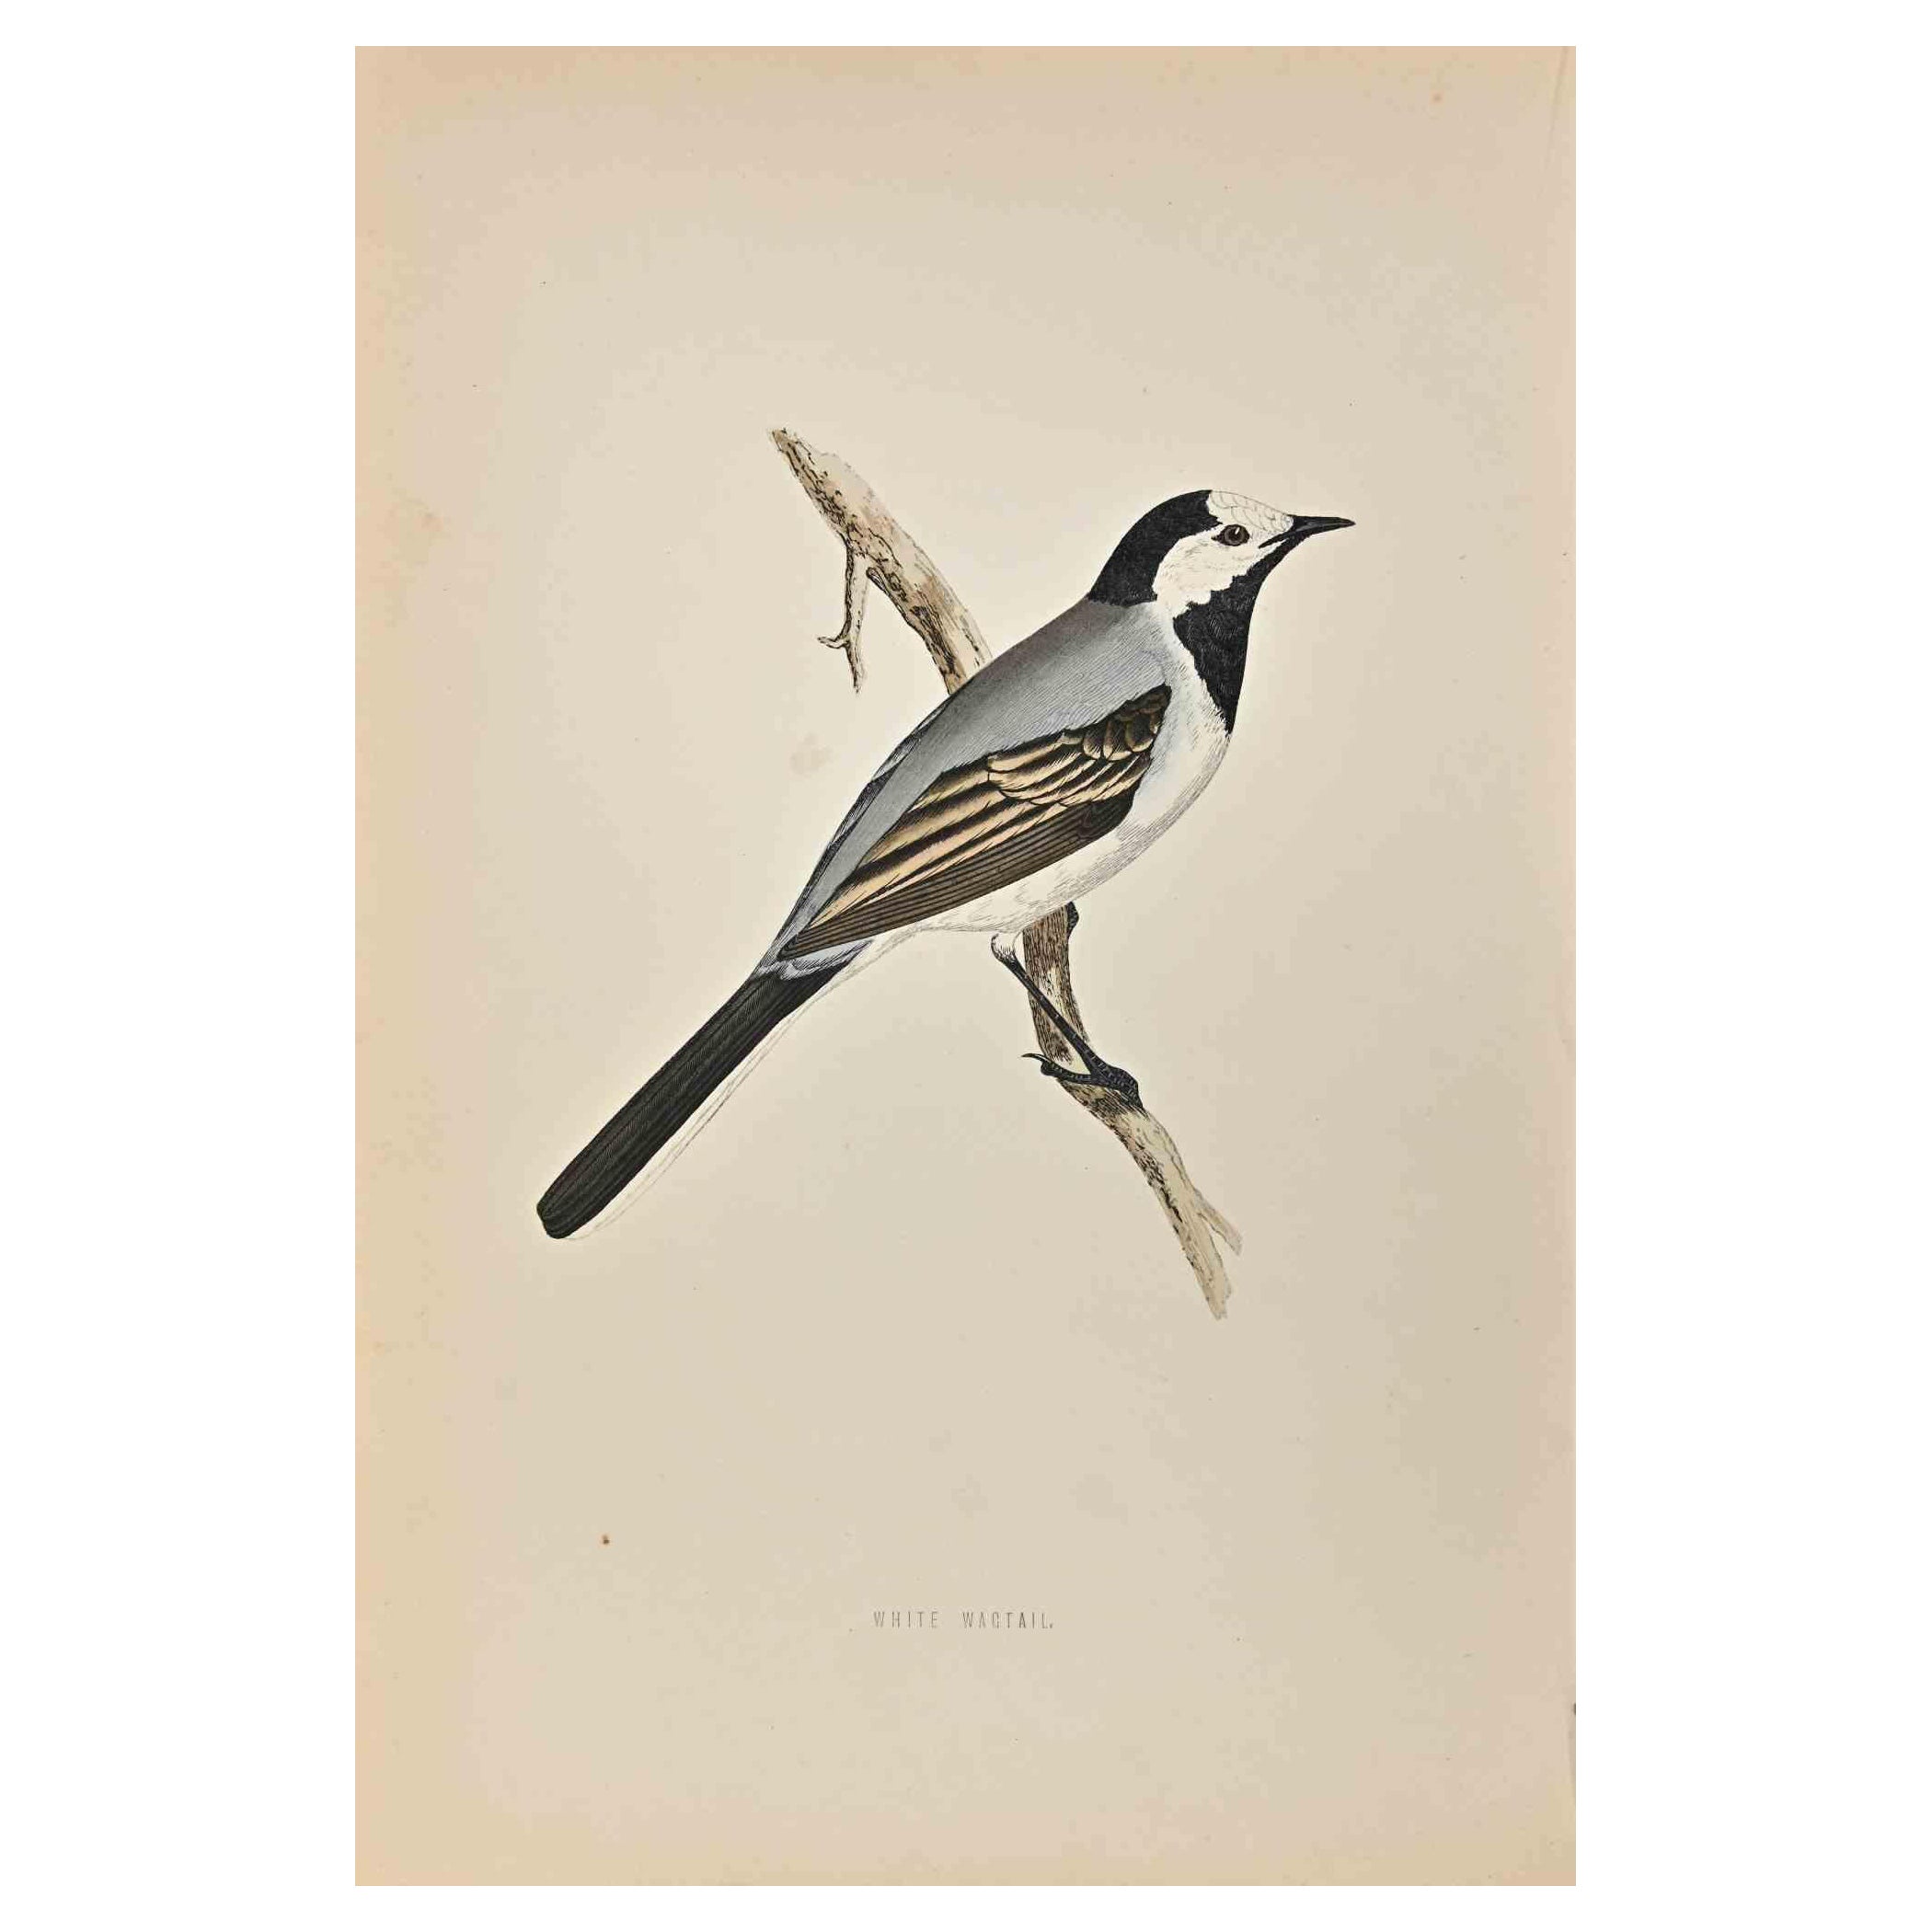 White Wagtail  is a modern artwork realized in 1870 by the British artist Alexander Francis Lydon (1836-1917) . 

Woodcut print, hand colored, published by London, Bell & Sons, 1870.  Name of the bird printed in plate. This work is part of a print